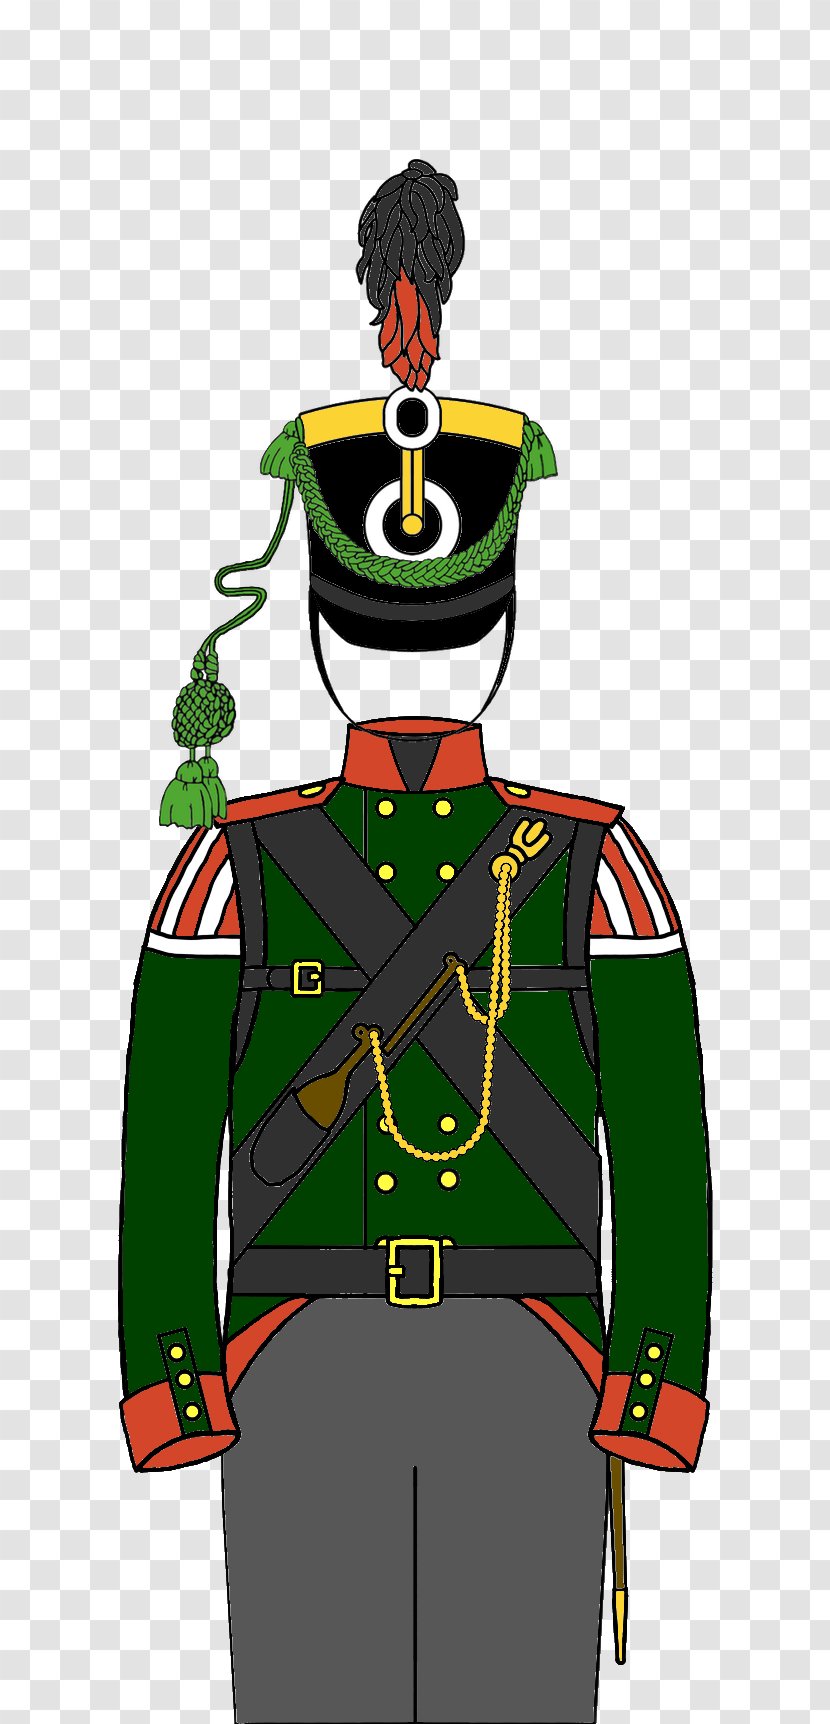 Military Uniforms Rank Illustration Character Transparent PNG